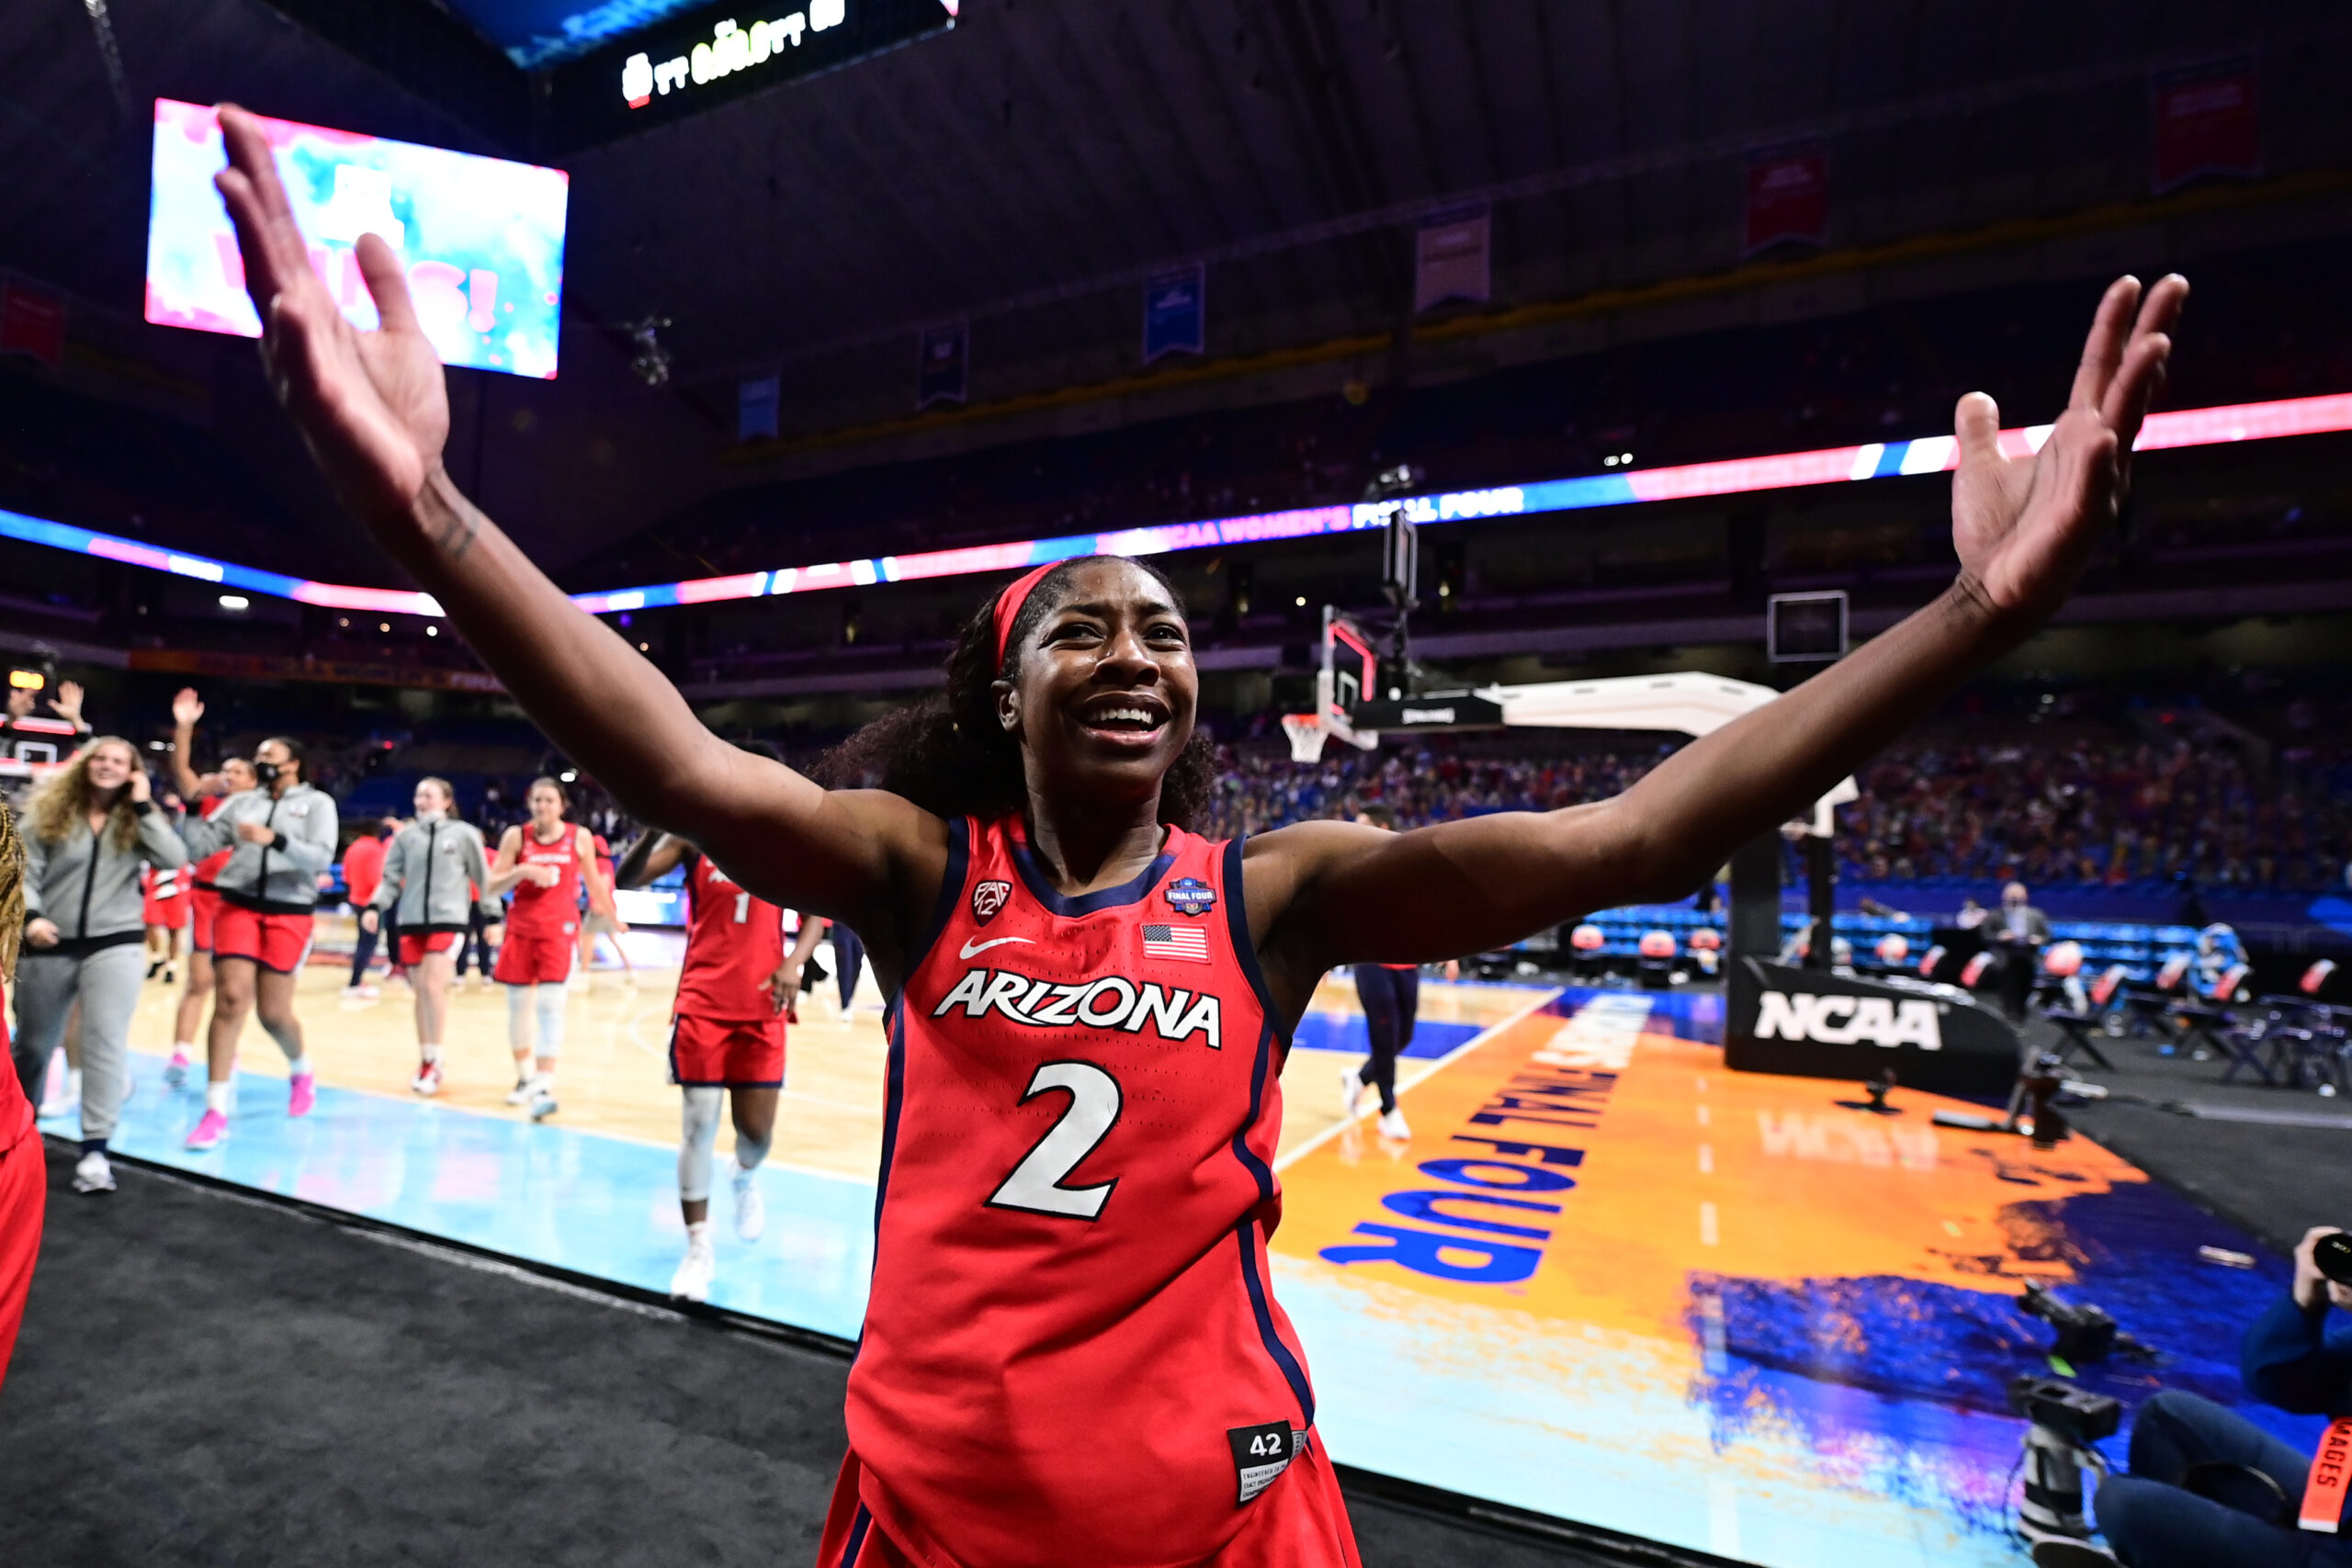 Arizona continues to make history, heads into the national championship game after taking down UConn